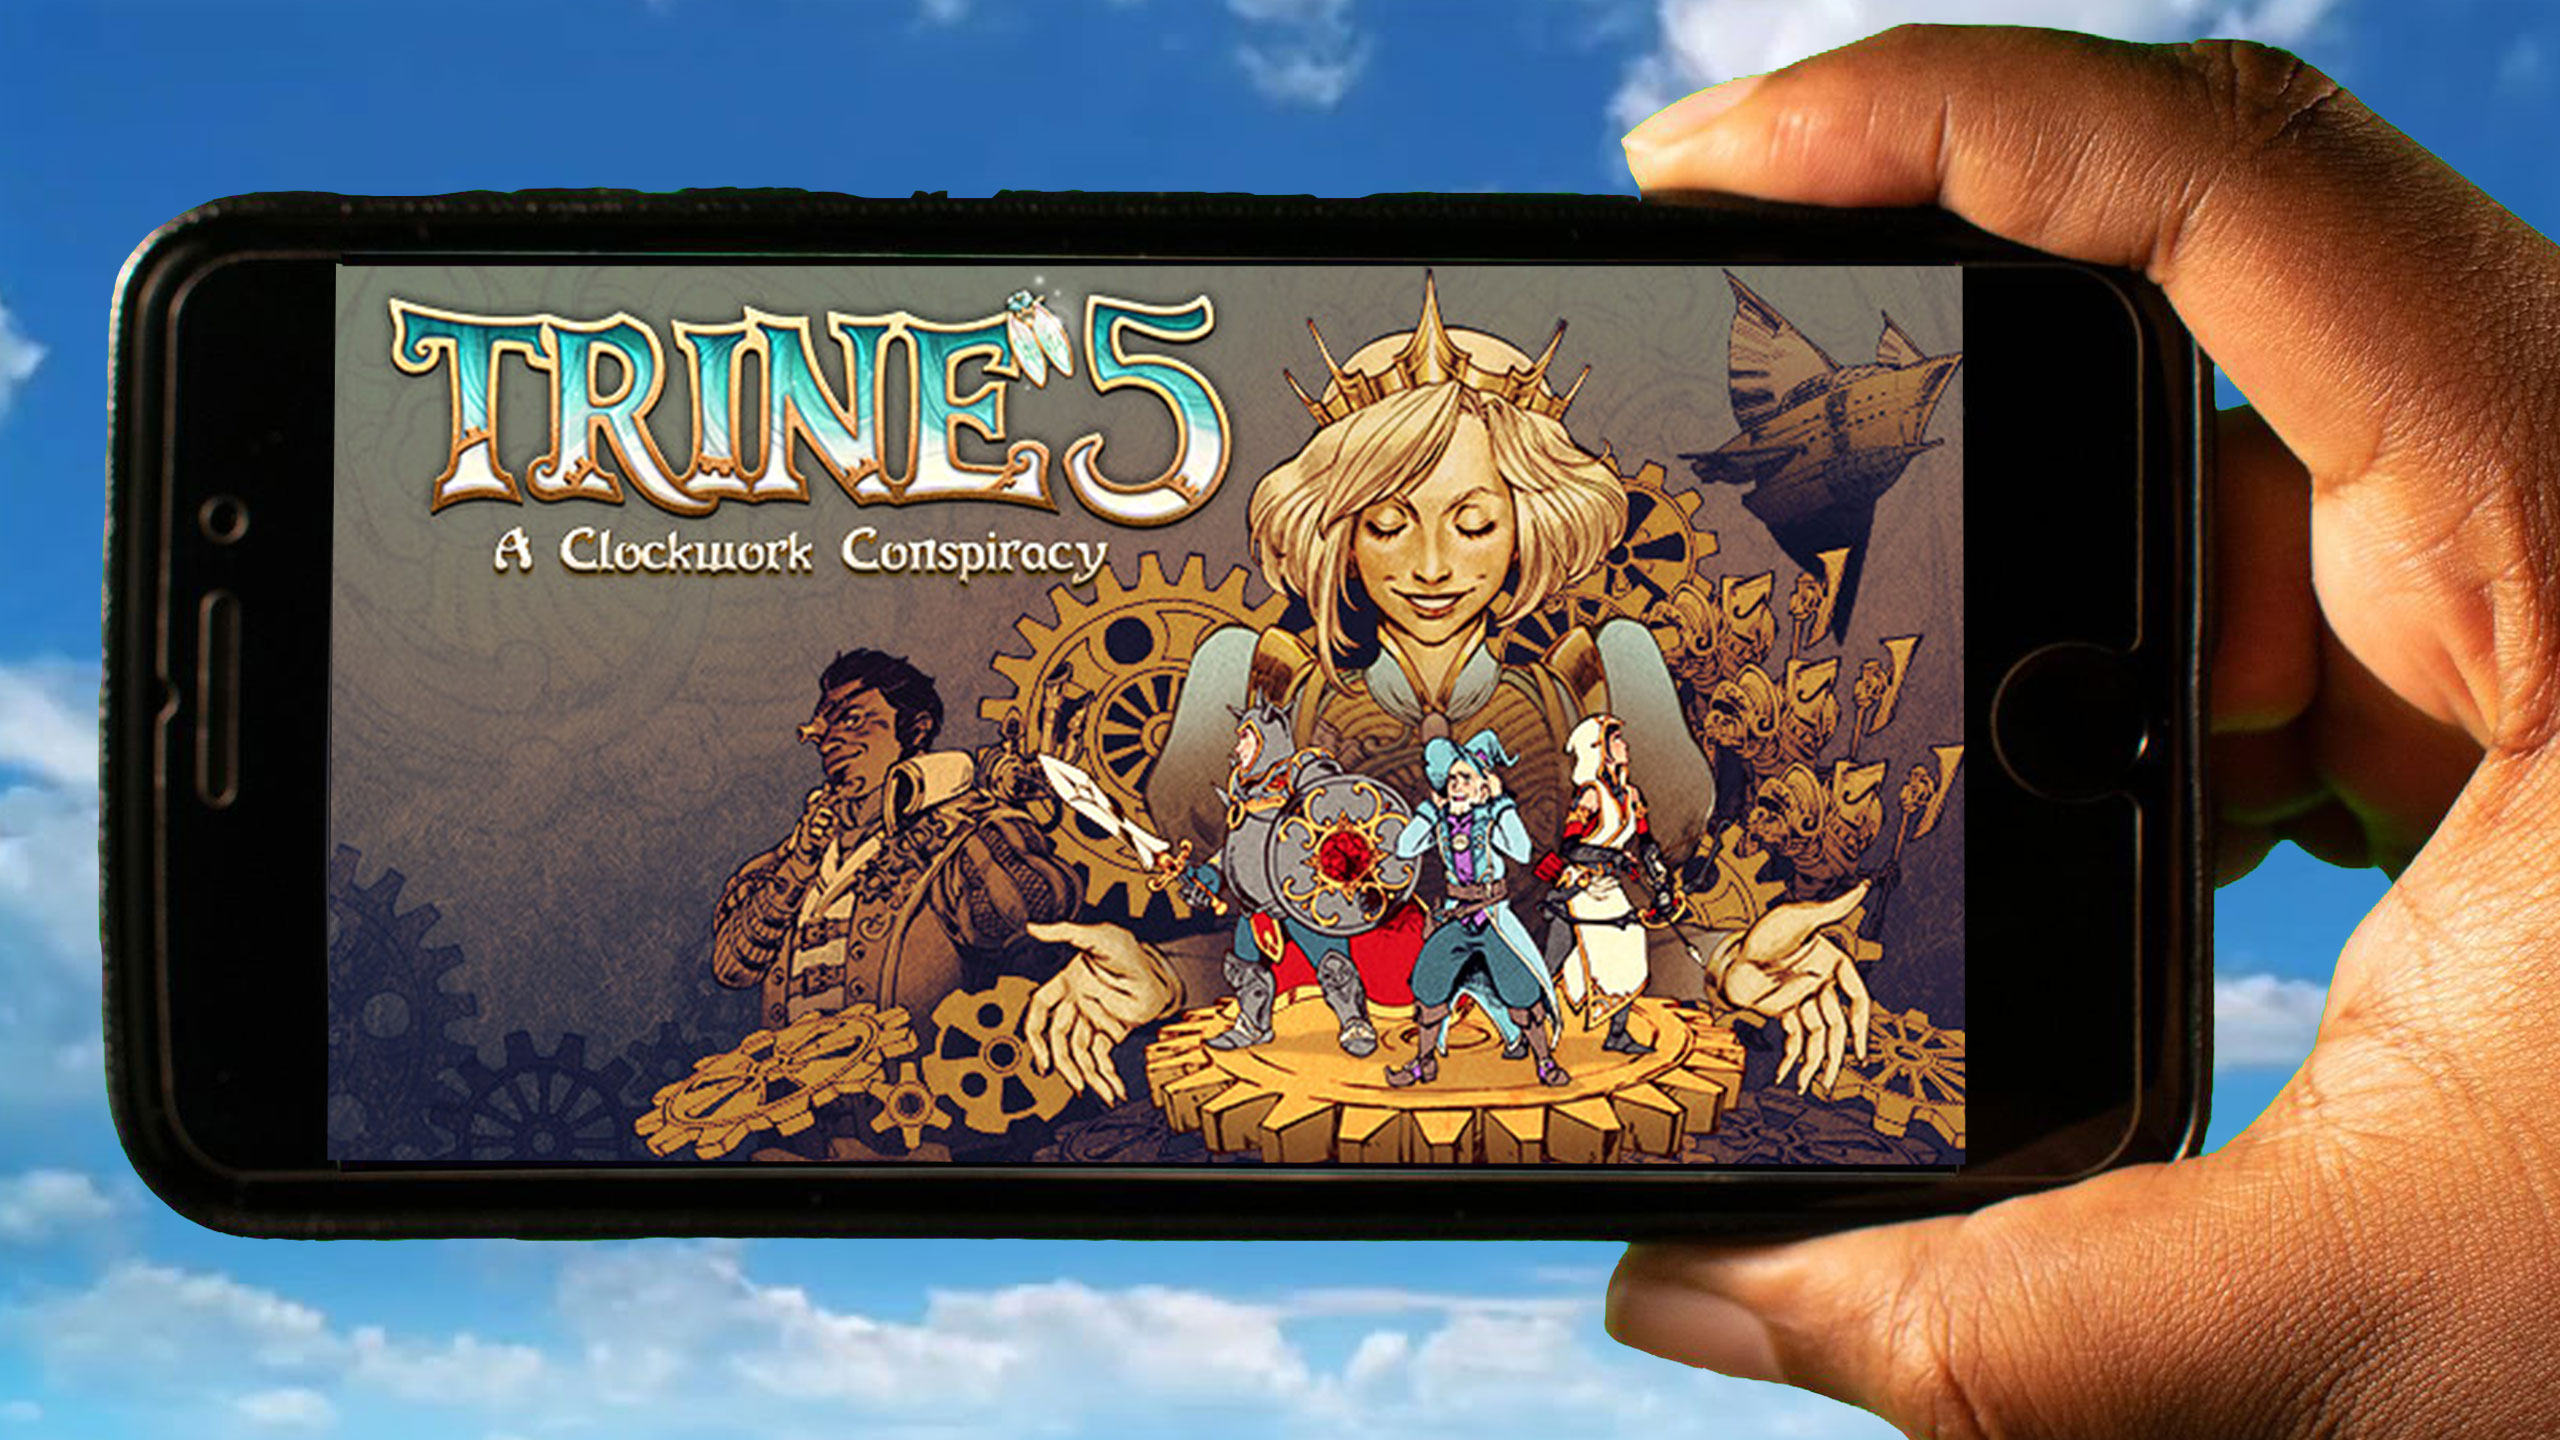 Trine 5: A Clockwork Conspiracy for ios download free